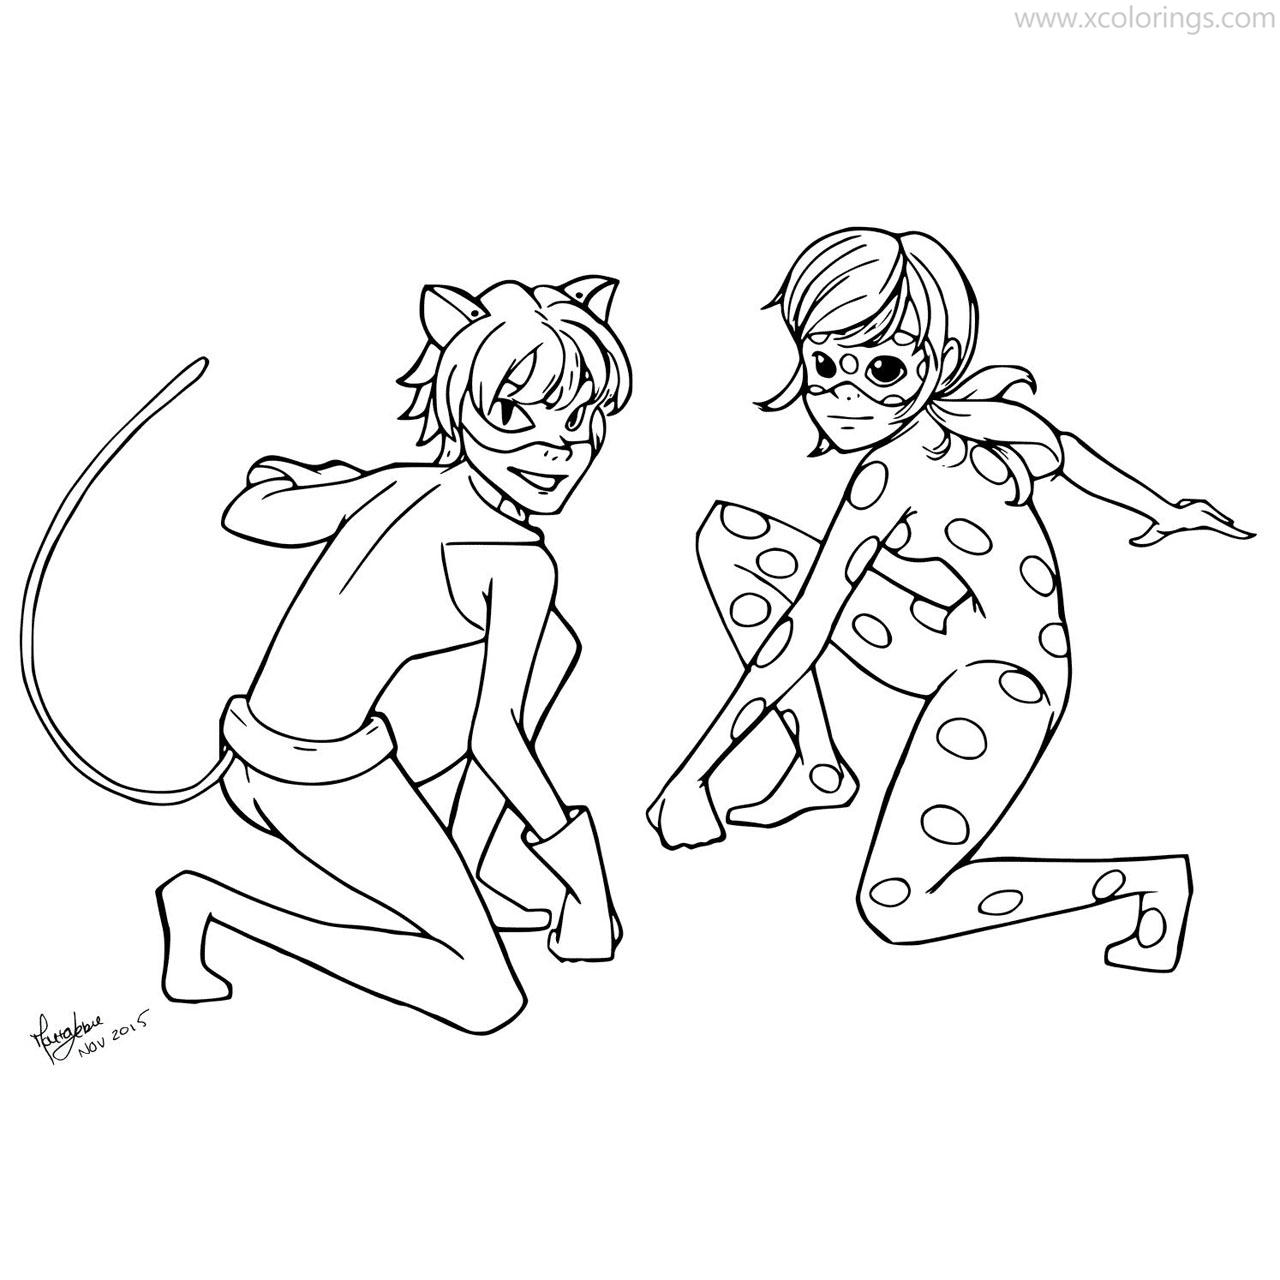 Free Miraculous Ladybug Coloring Pages Marinandte Dupain Cheng And Adrien Agreste printable